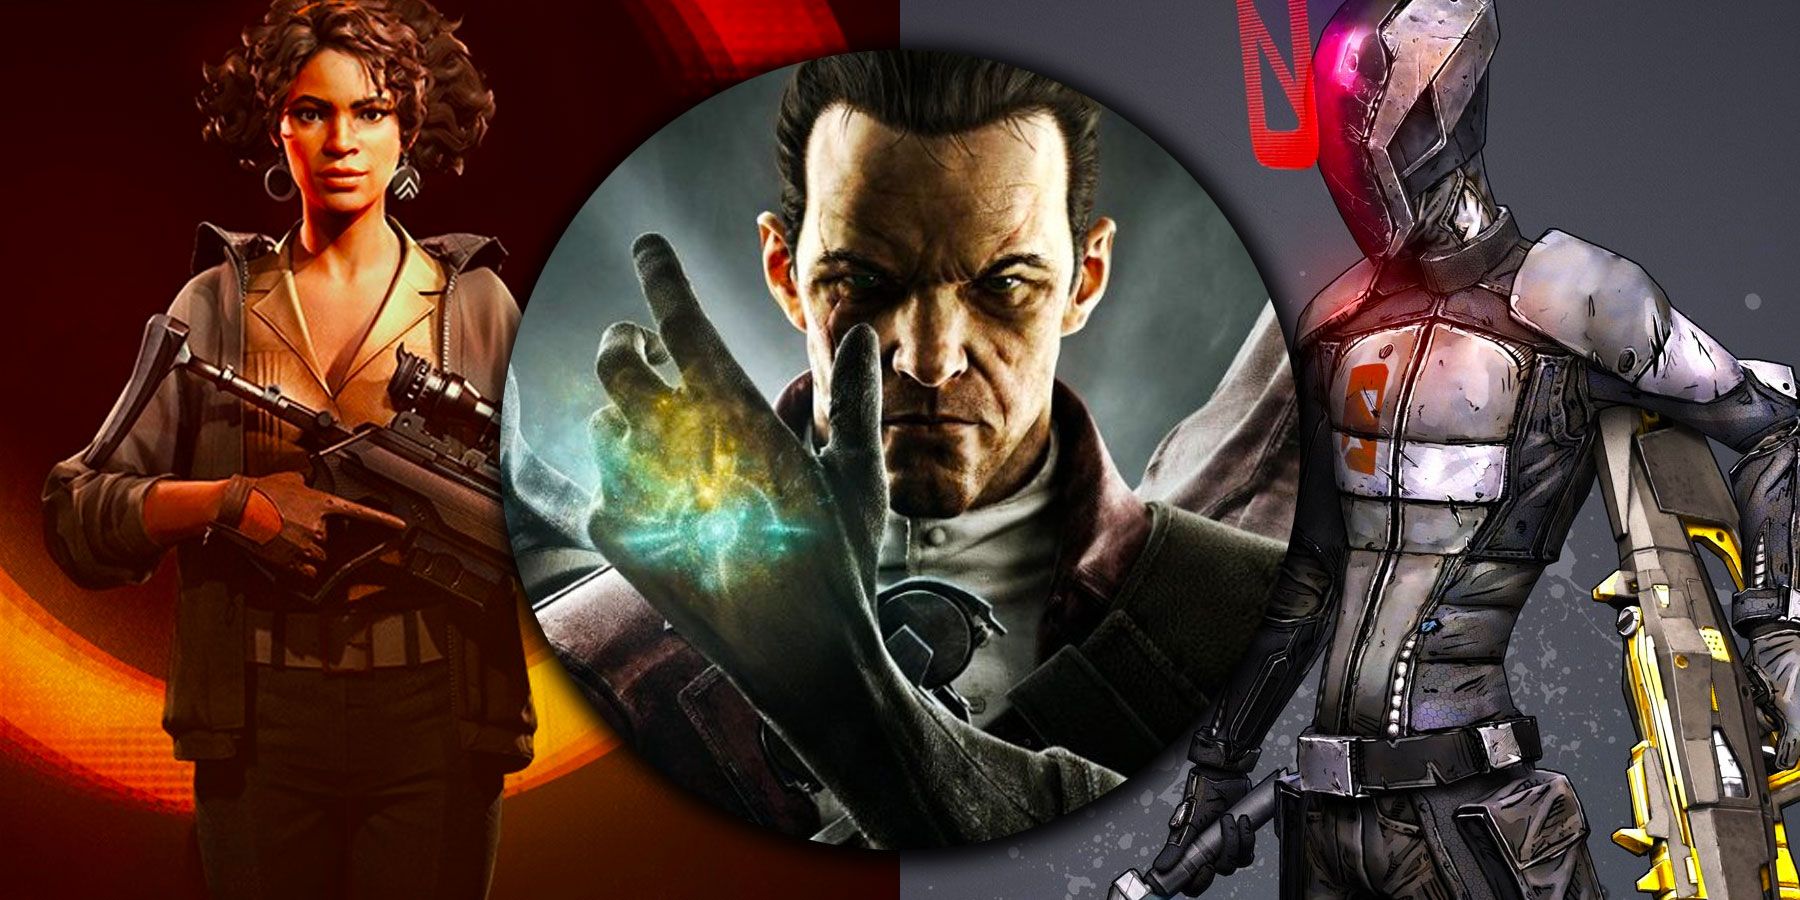 Julianna Blake from Deathloop, Daud from Dishonored, and Zer0 from Borderlands compilation image